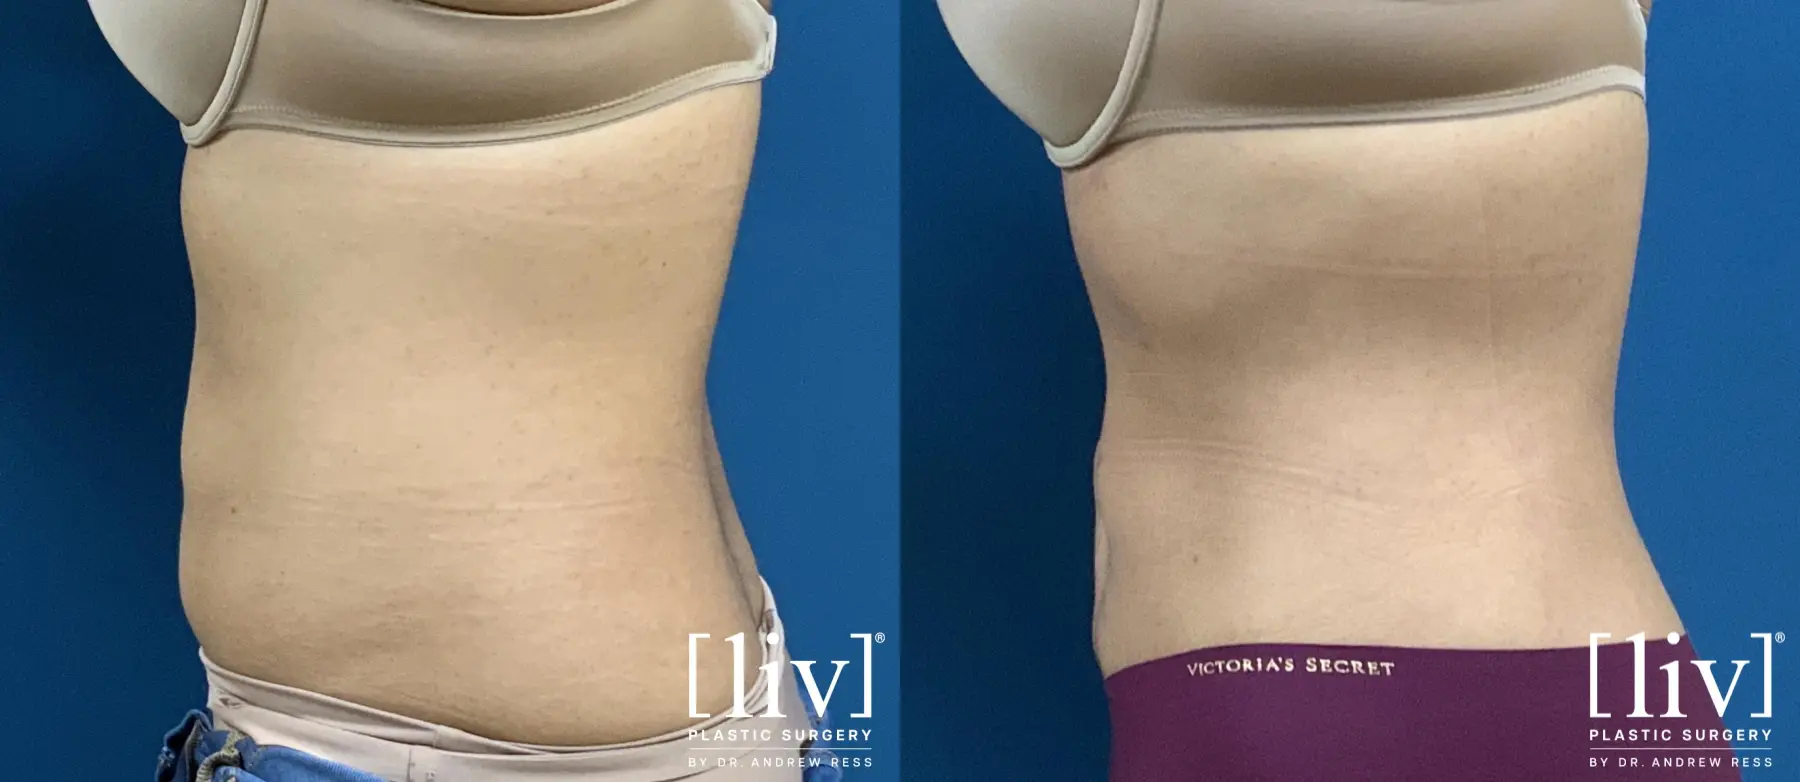 Liposuction - Before and After 3